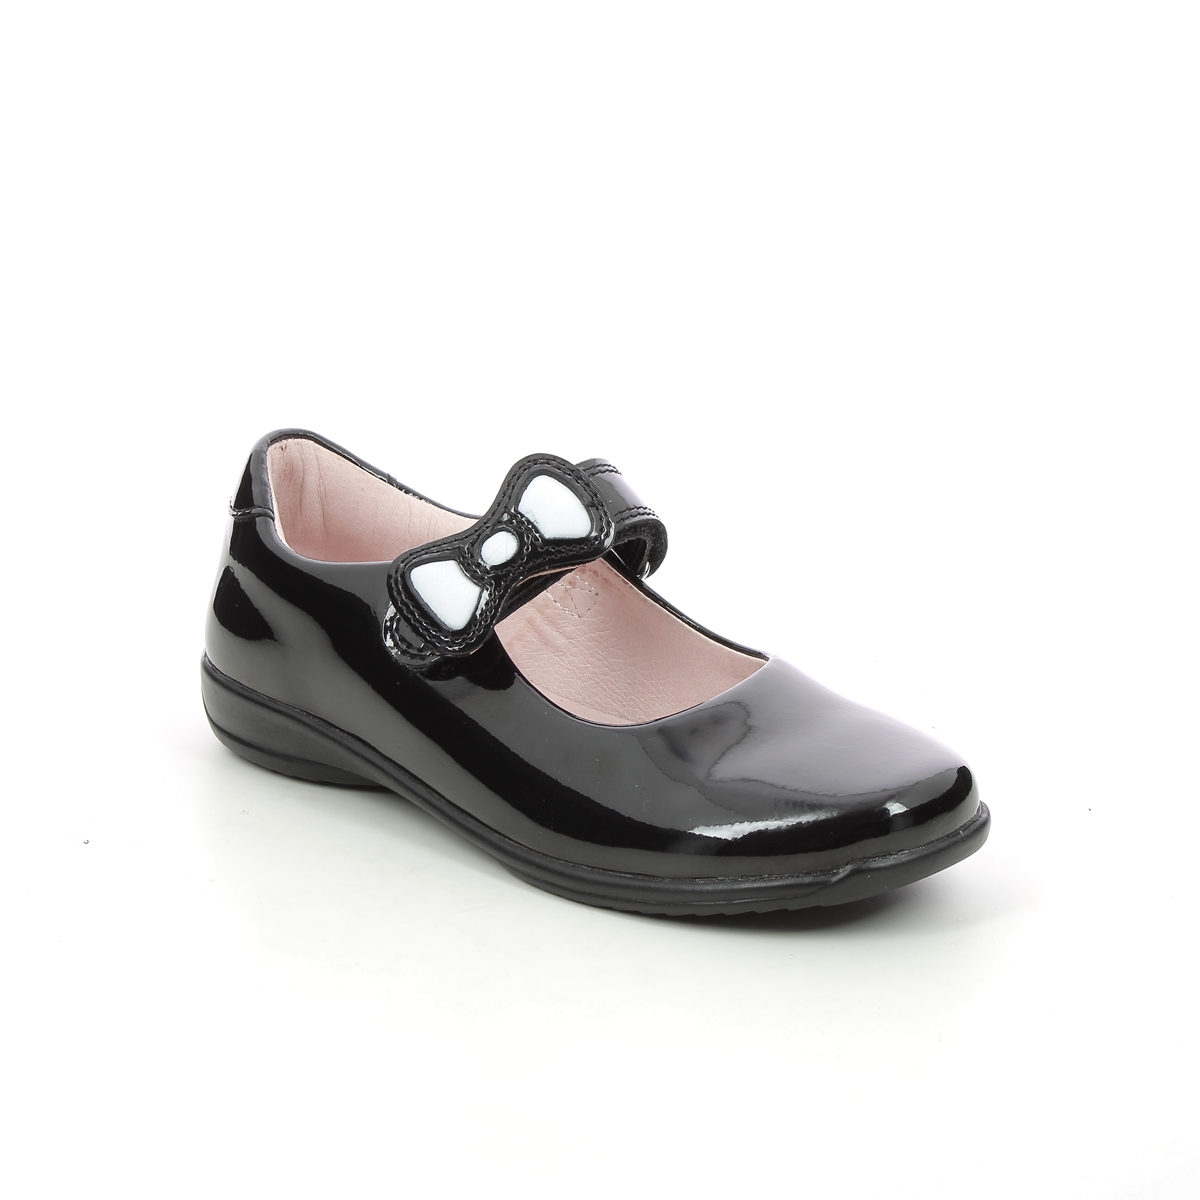 Lelli Kelly - Colourissima Bow F Fit In Black Patent Lk8802-Db01 In Size 29 In Plain Black Patent Girls Shoes  In Black Patent For School For kids